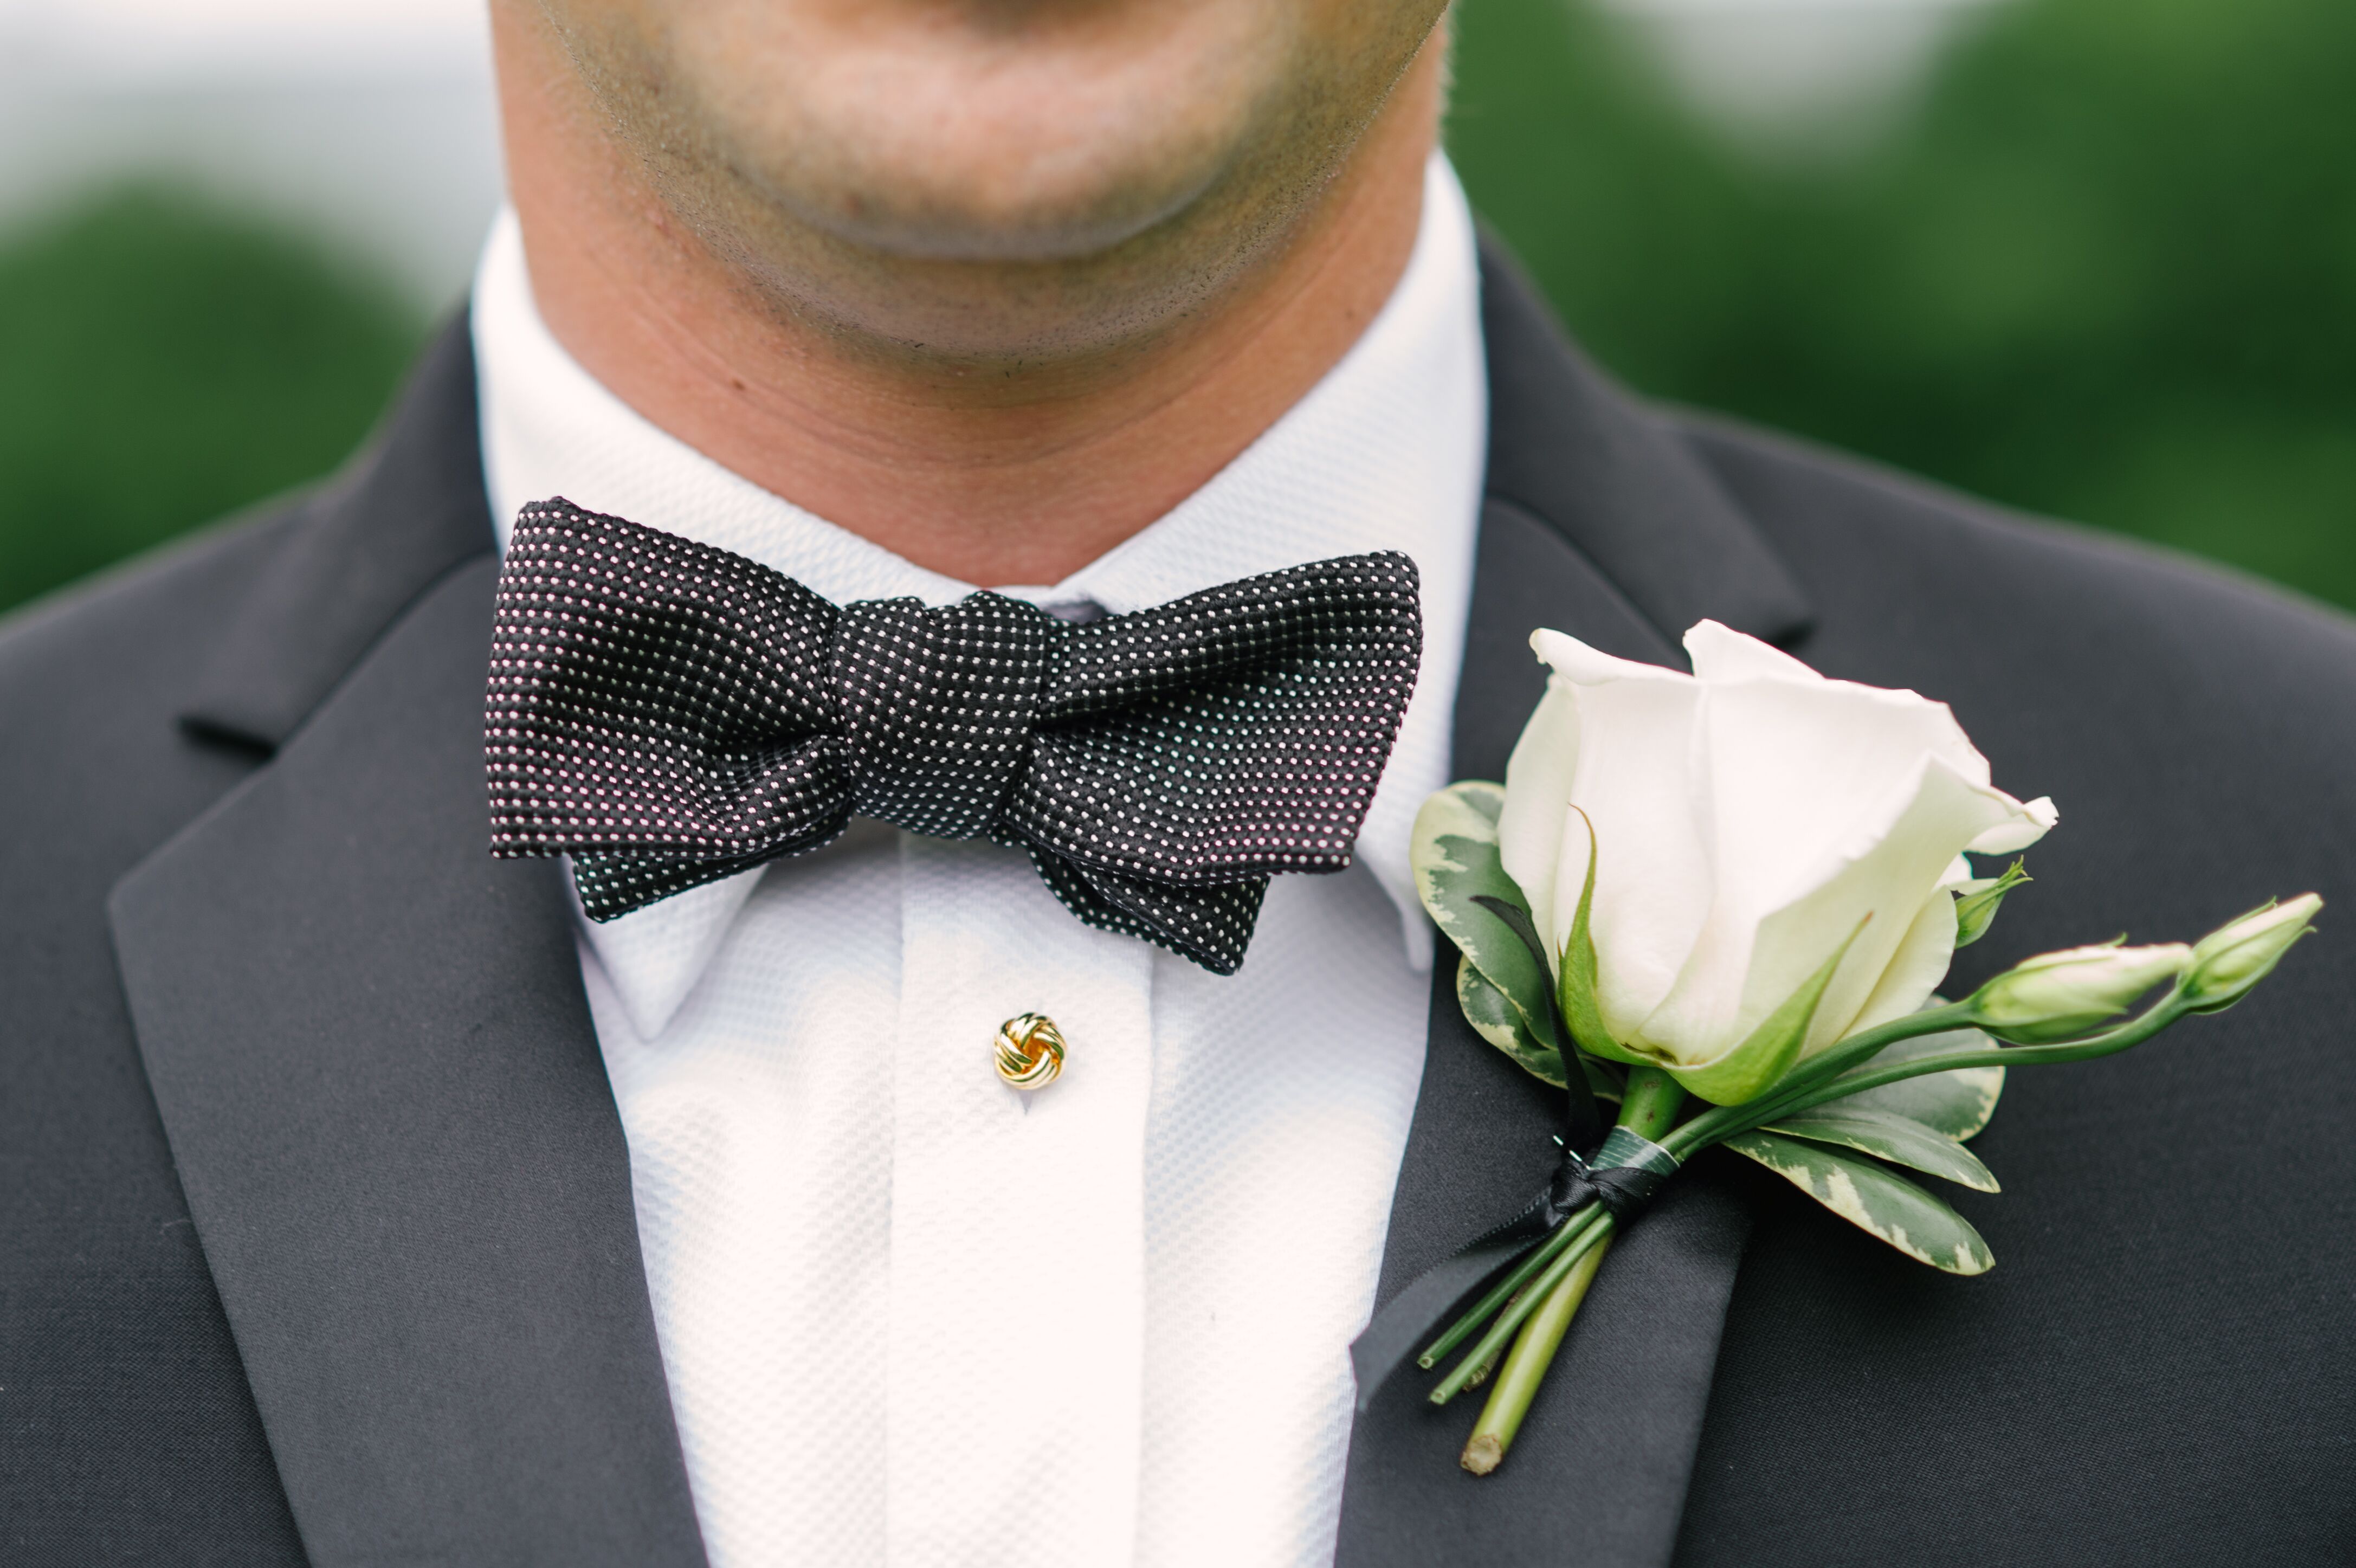 White Rose Boutonniere With Black Bow Tie